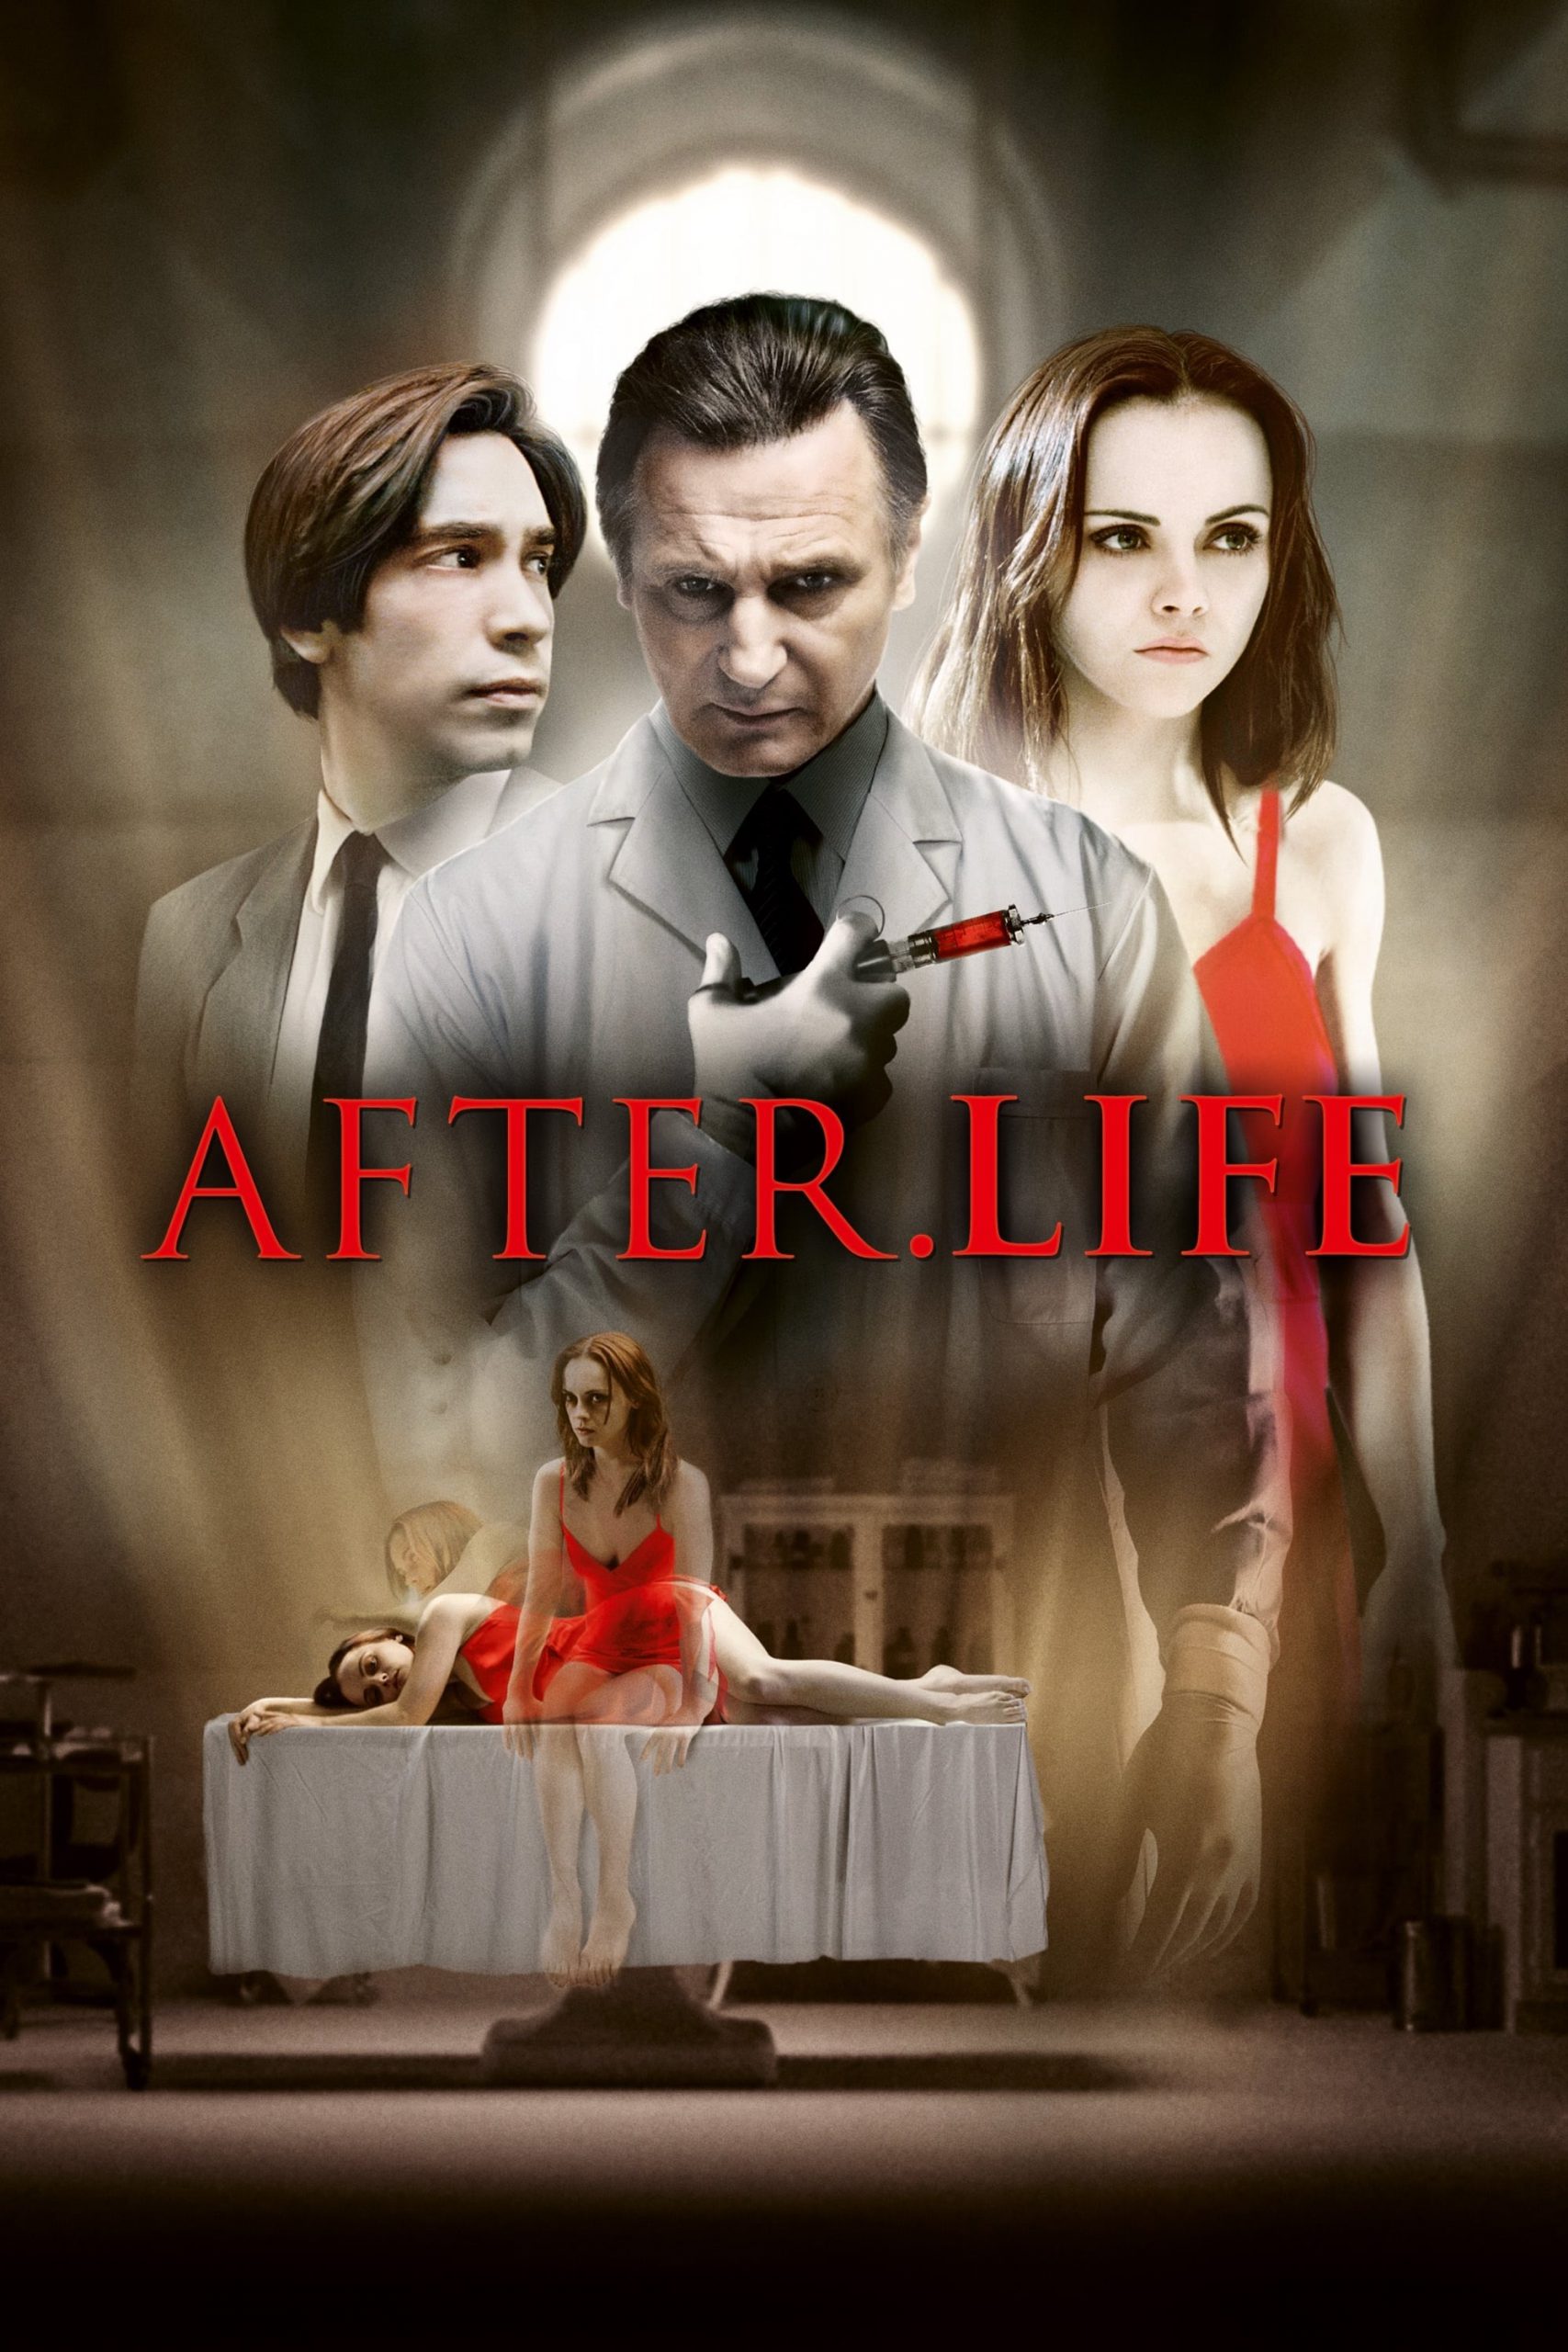 After.Life [HD] (2010)